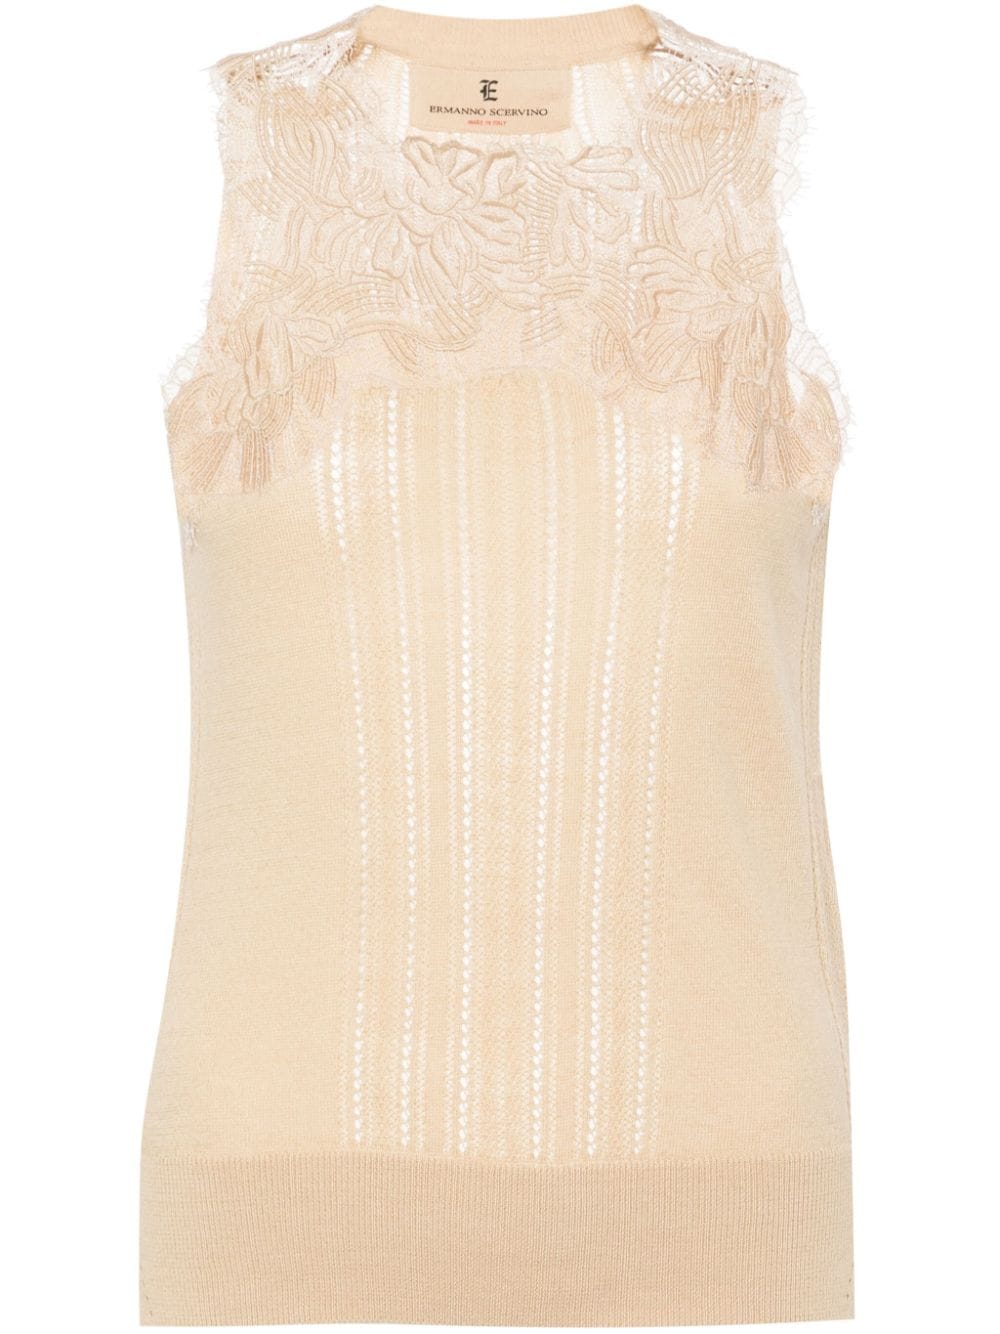 Image 1 of Ermanno Scervino  lace-detail knitted top